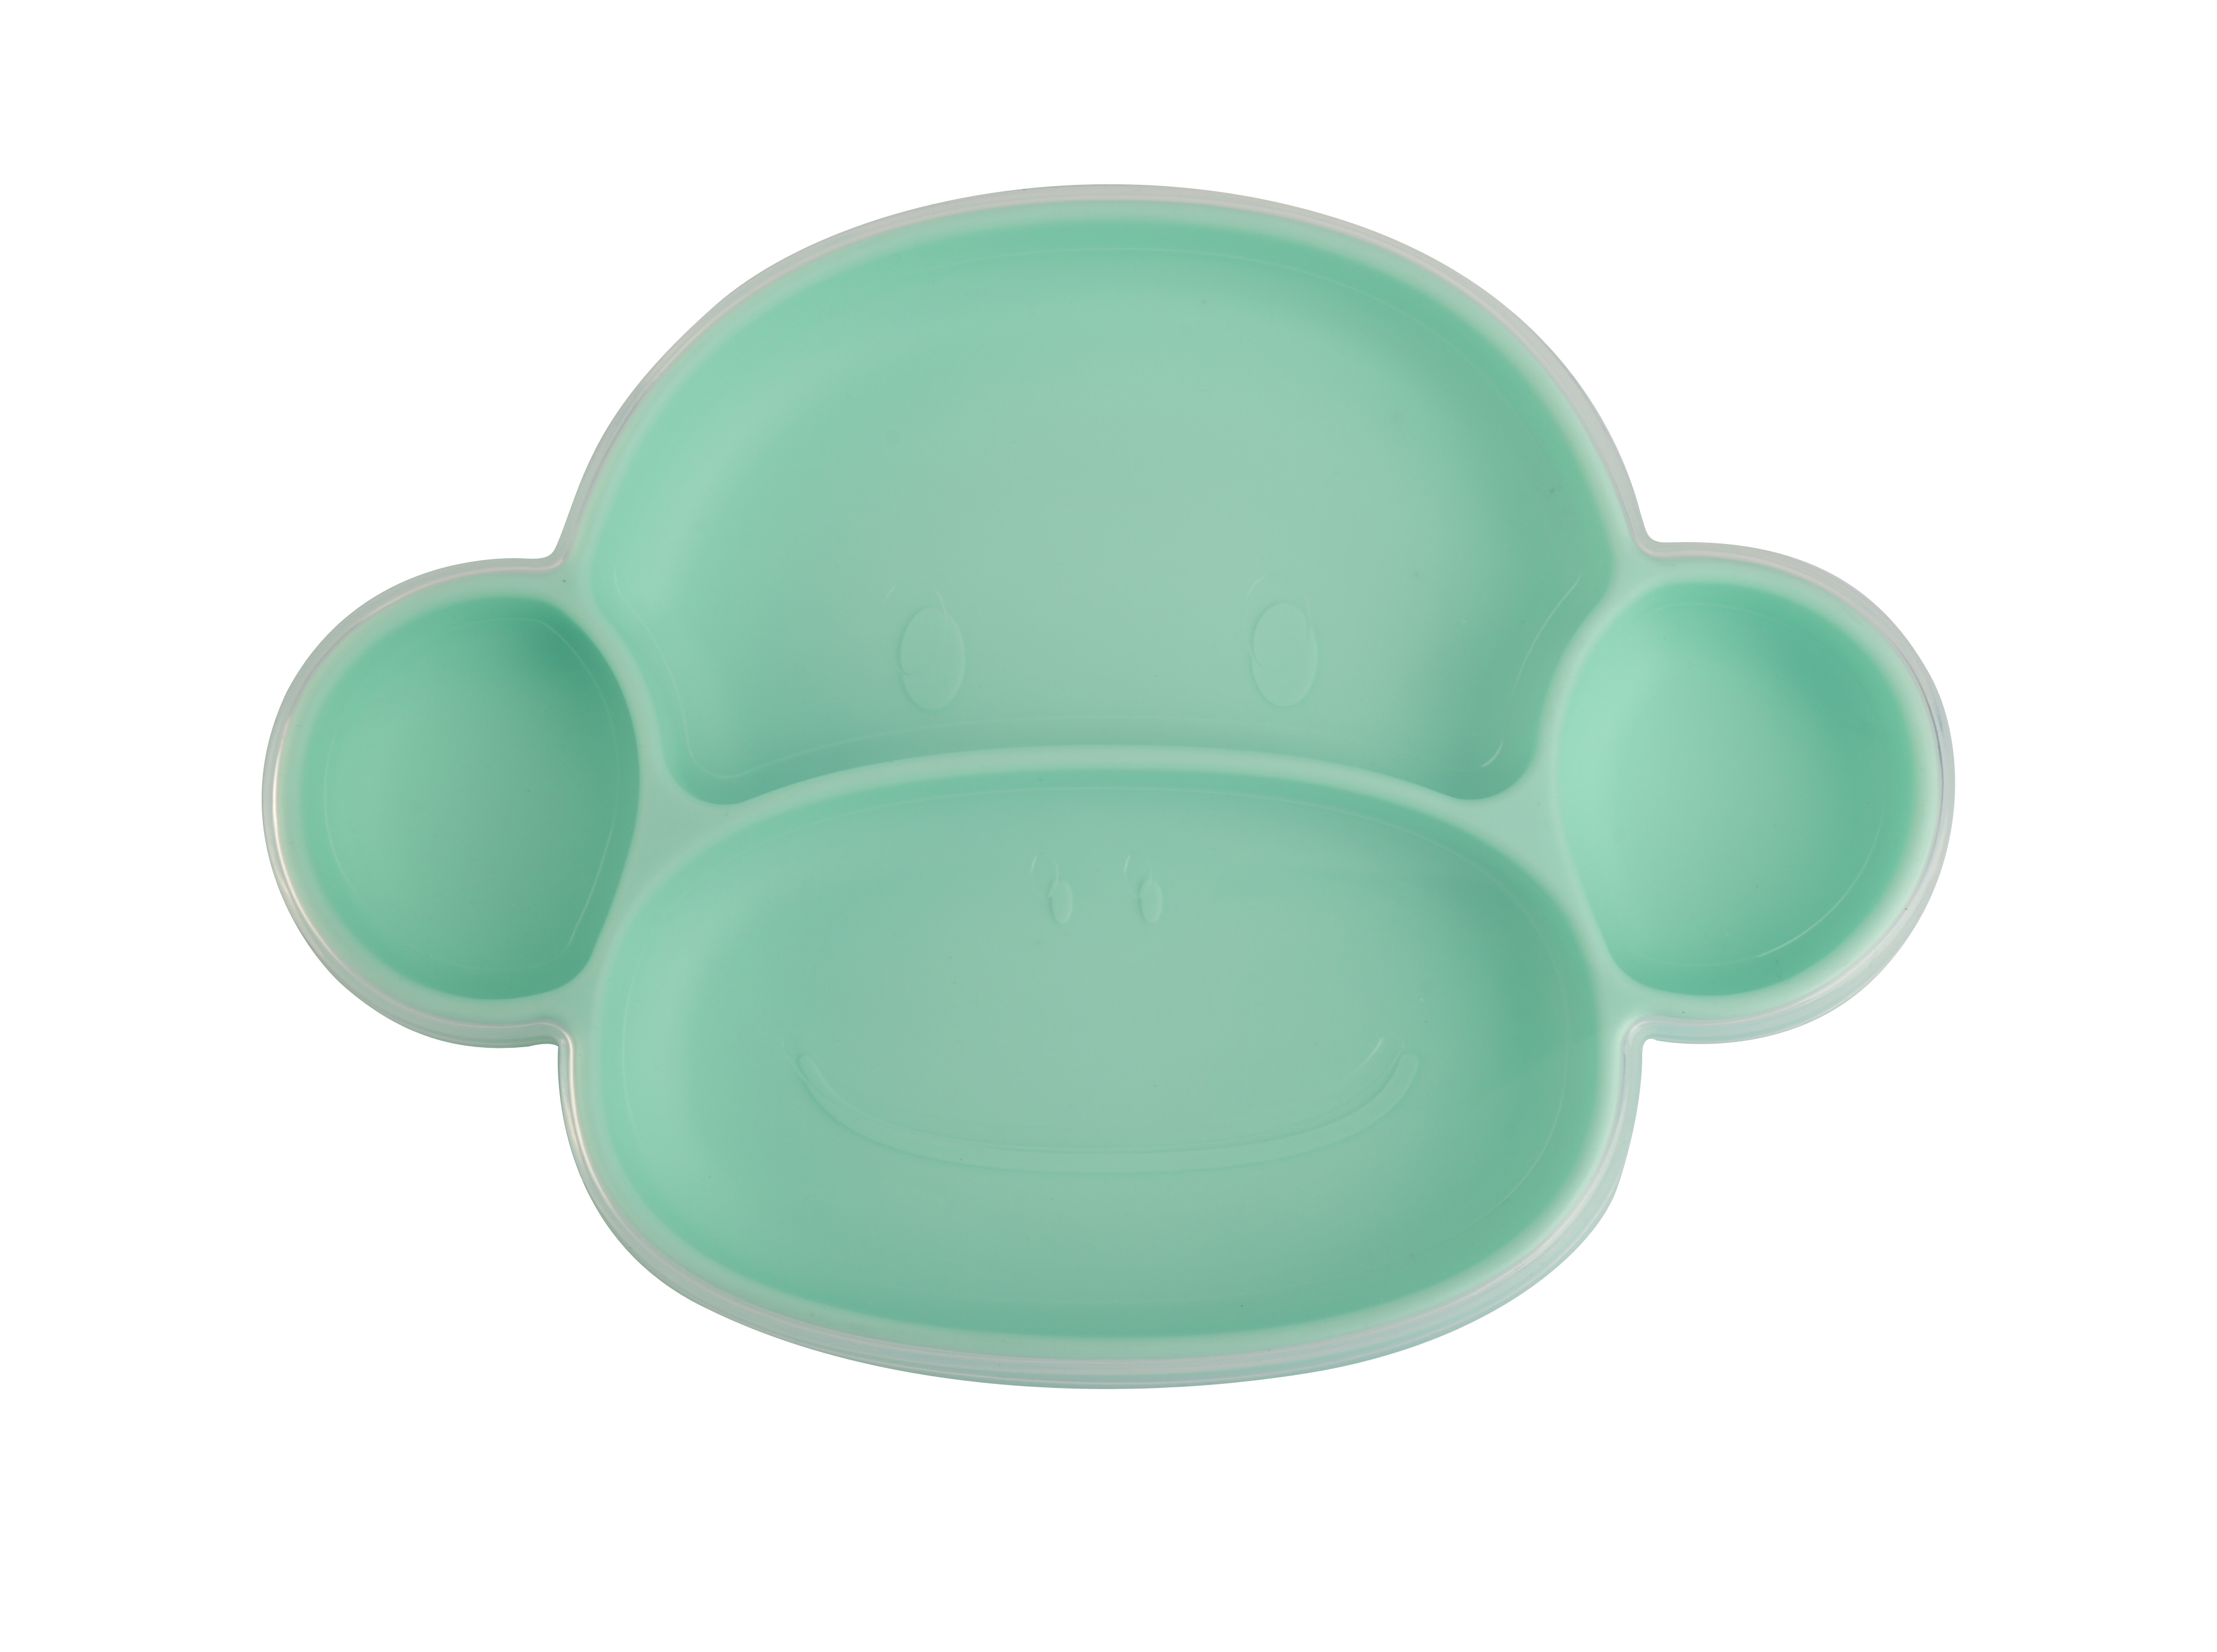 TT043 Monkey Shape Compartment Tray | Silicone Compartment Tray